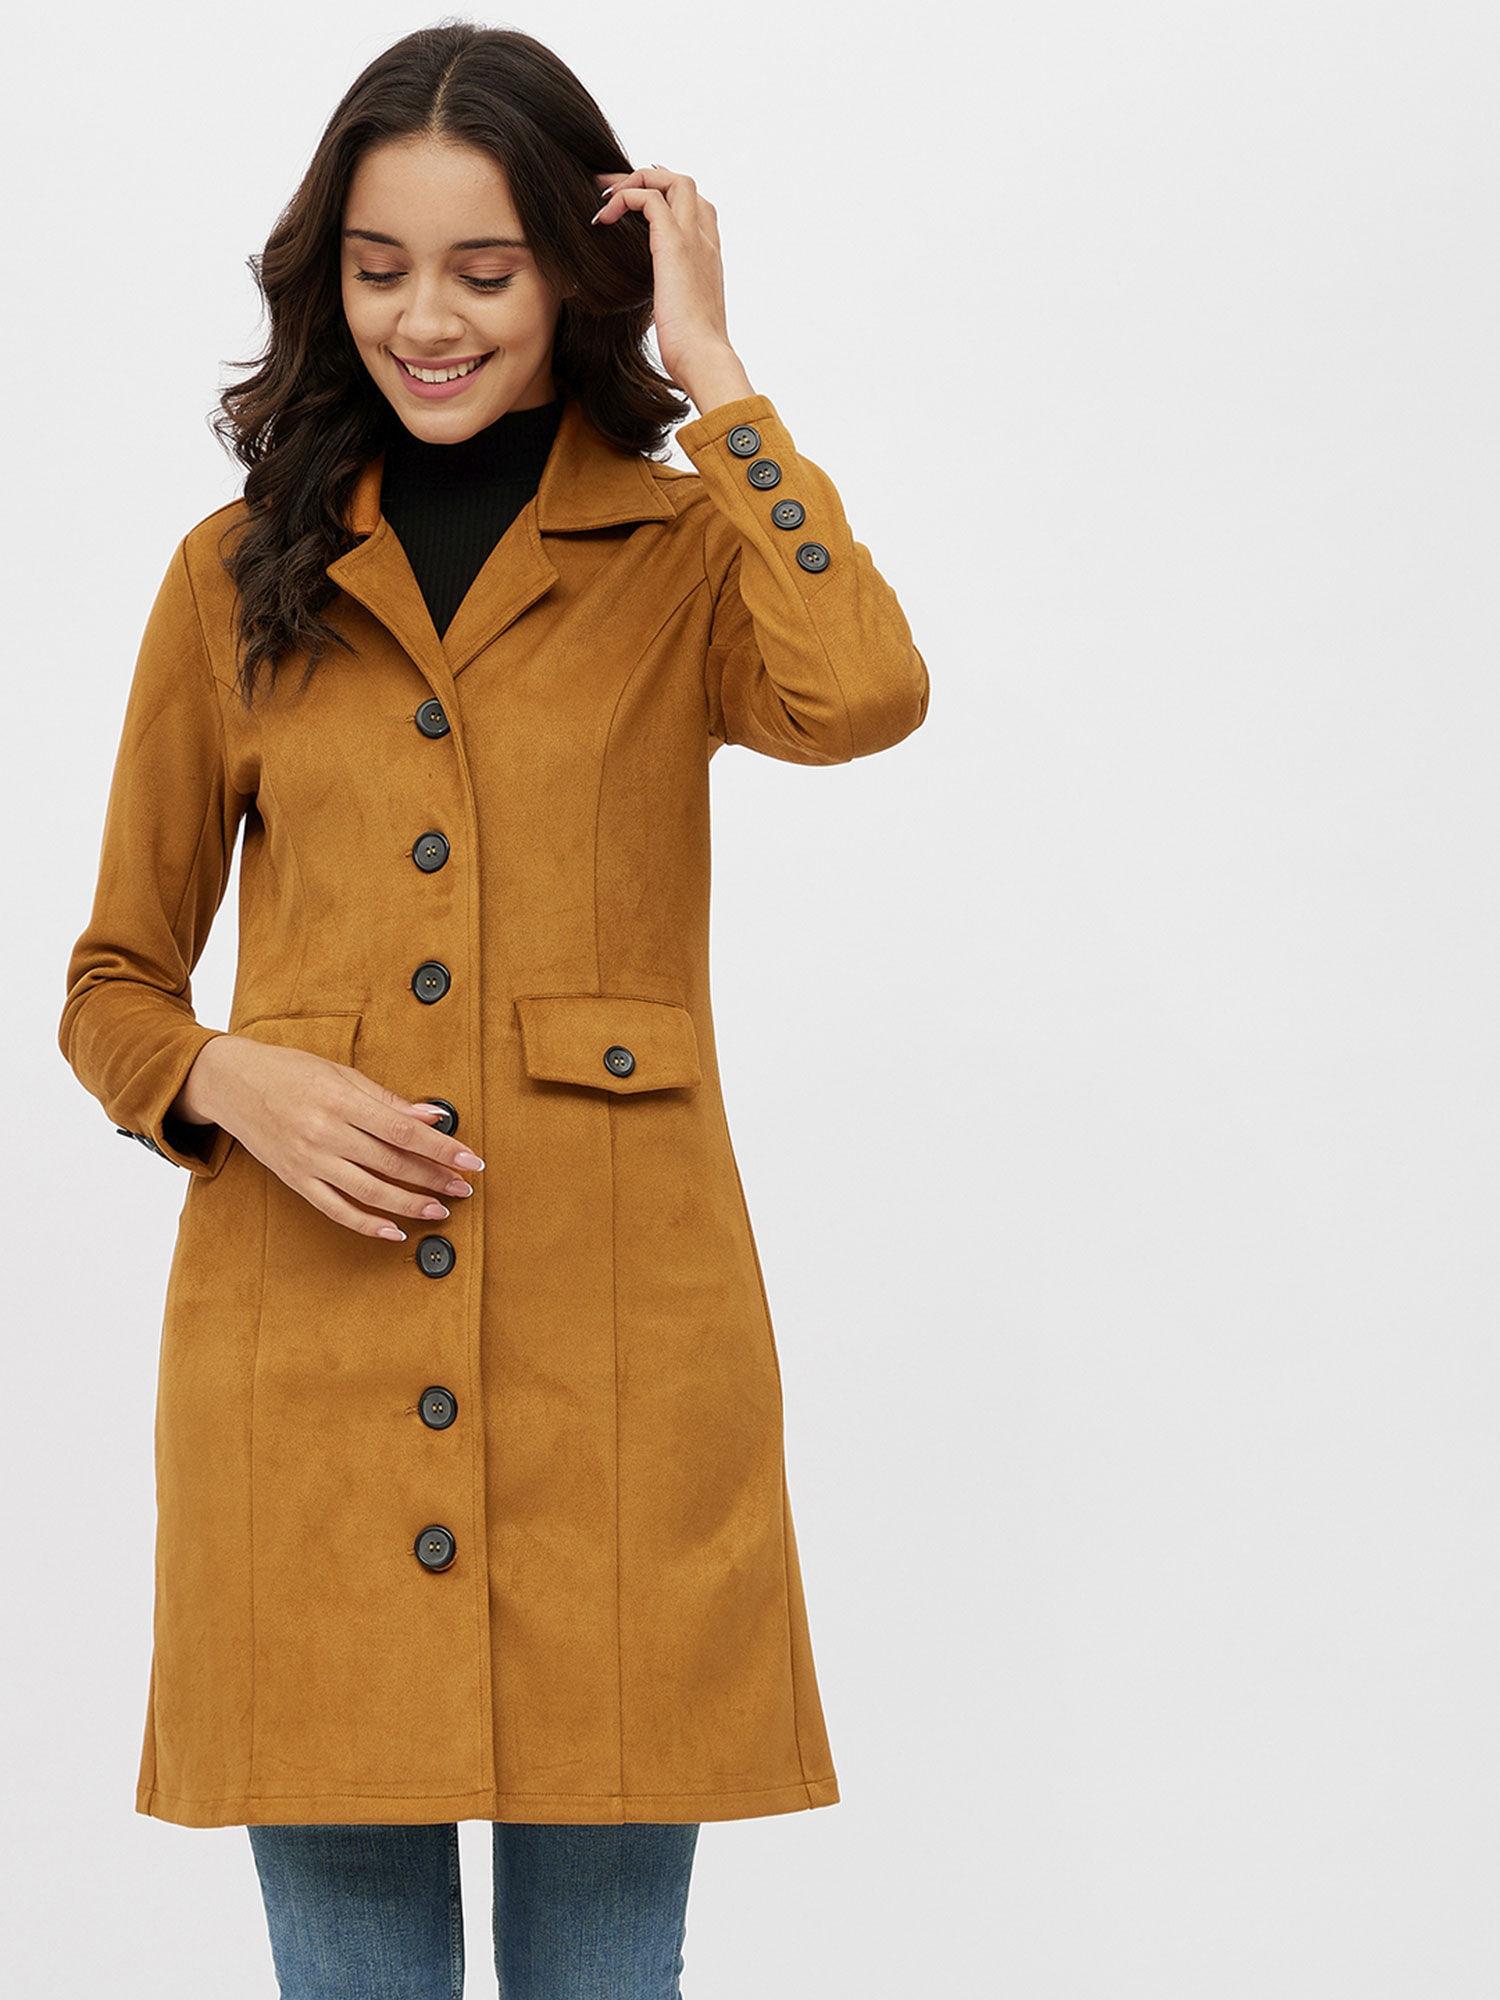 tan solid long sleeve jacket with button closure